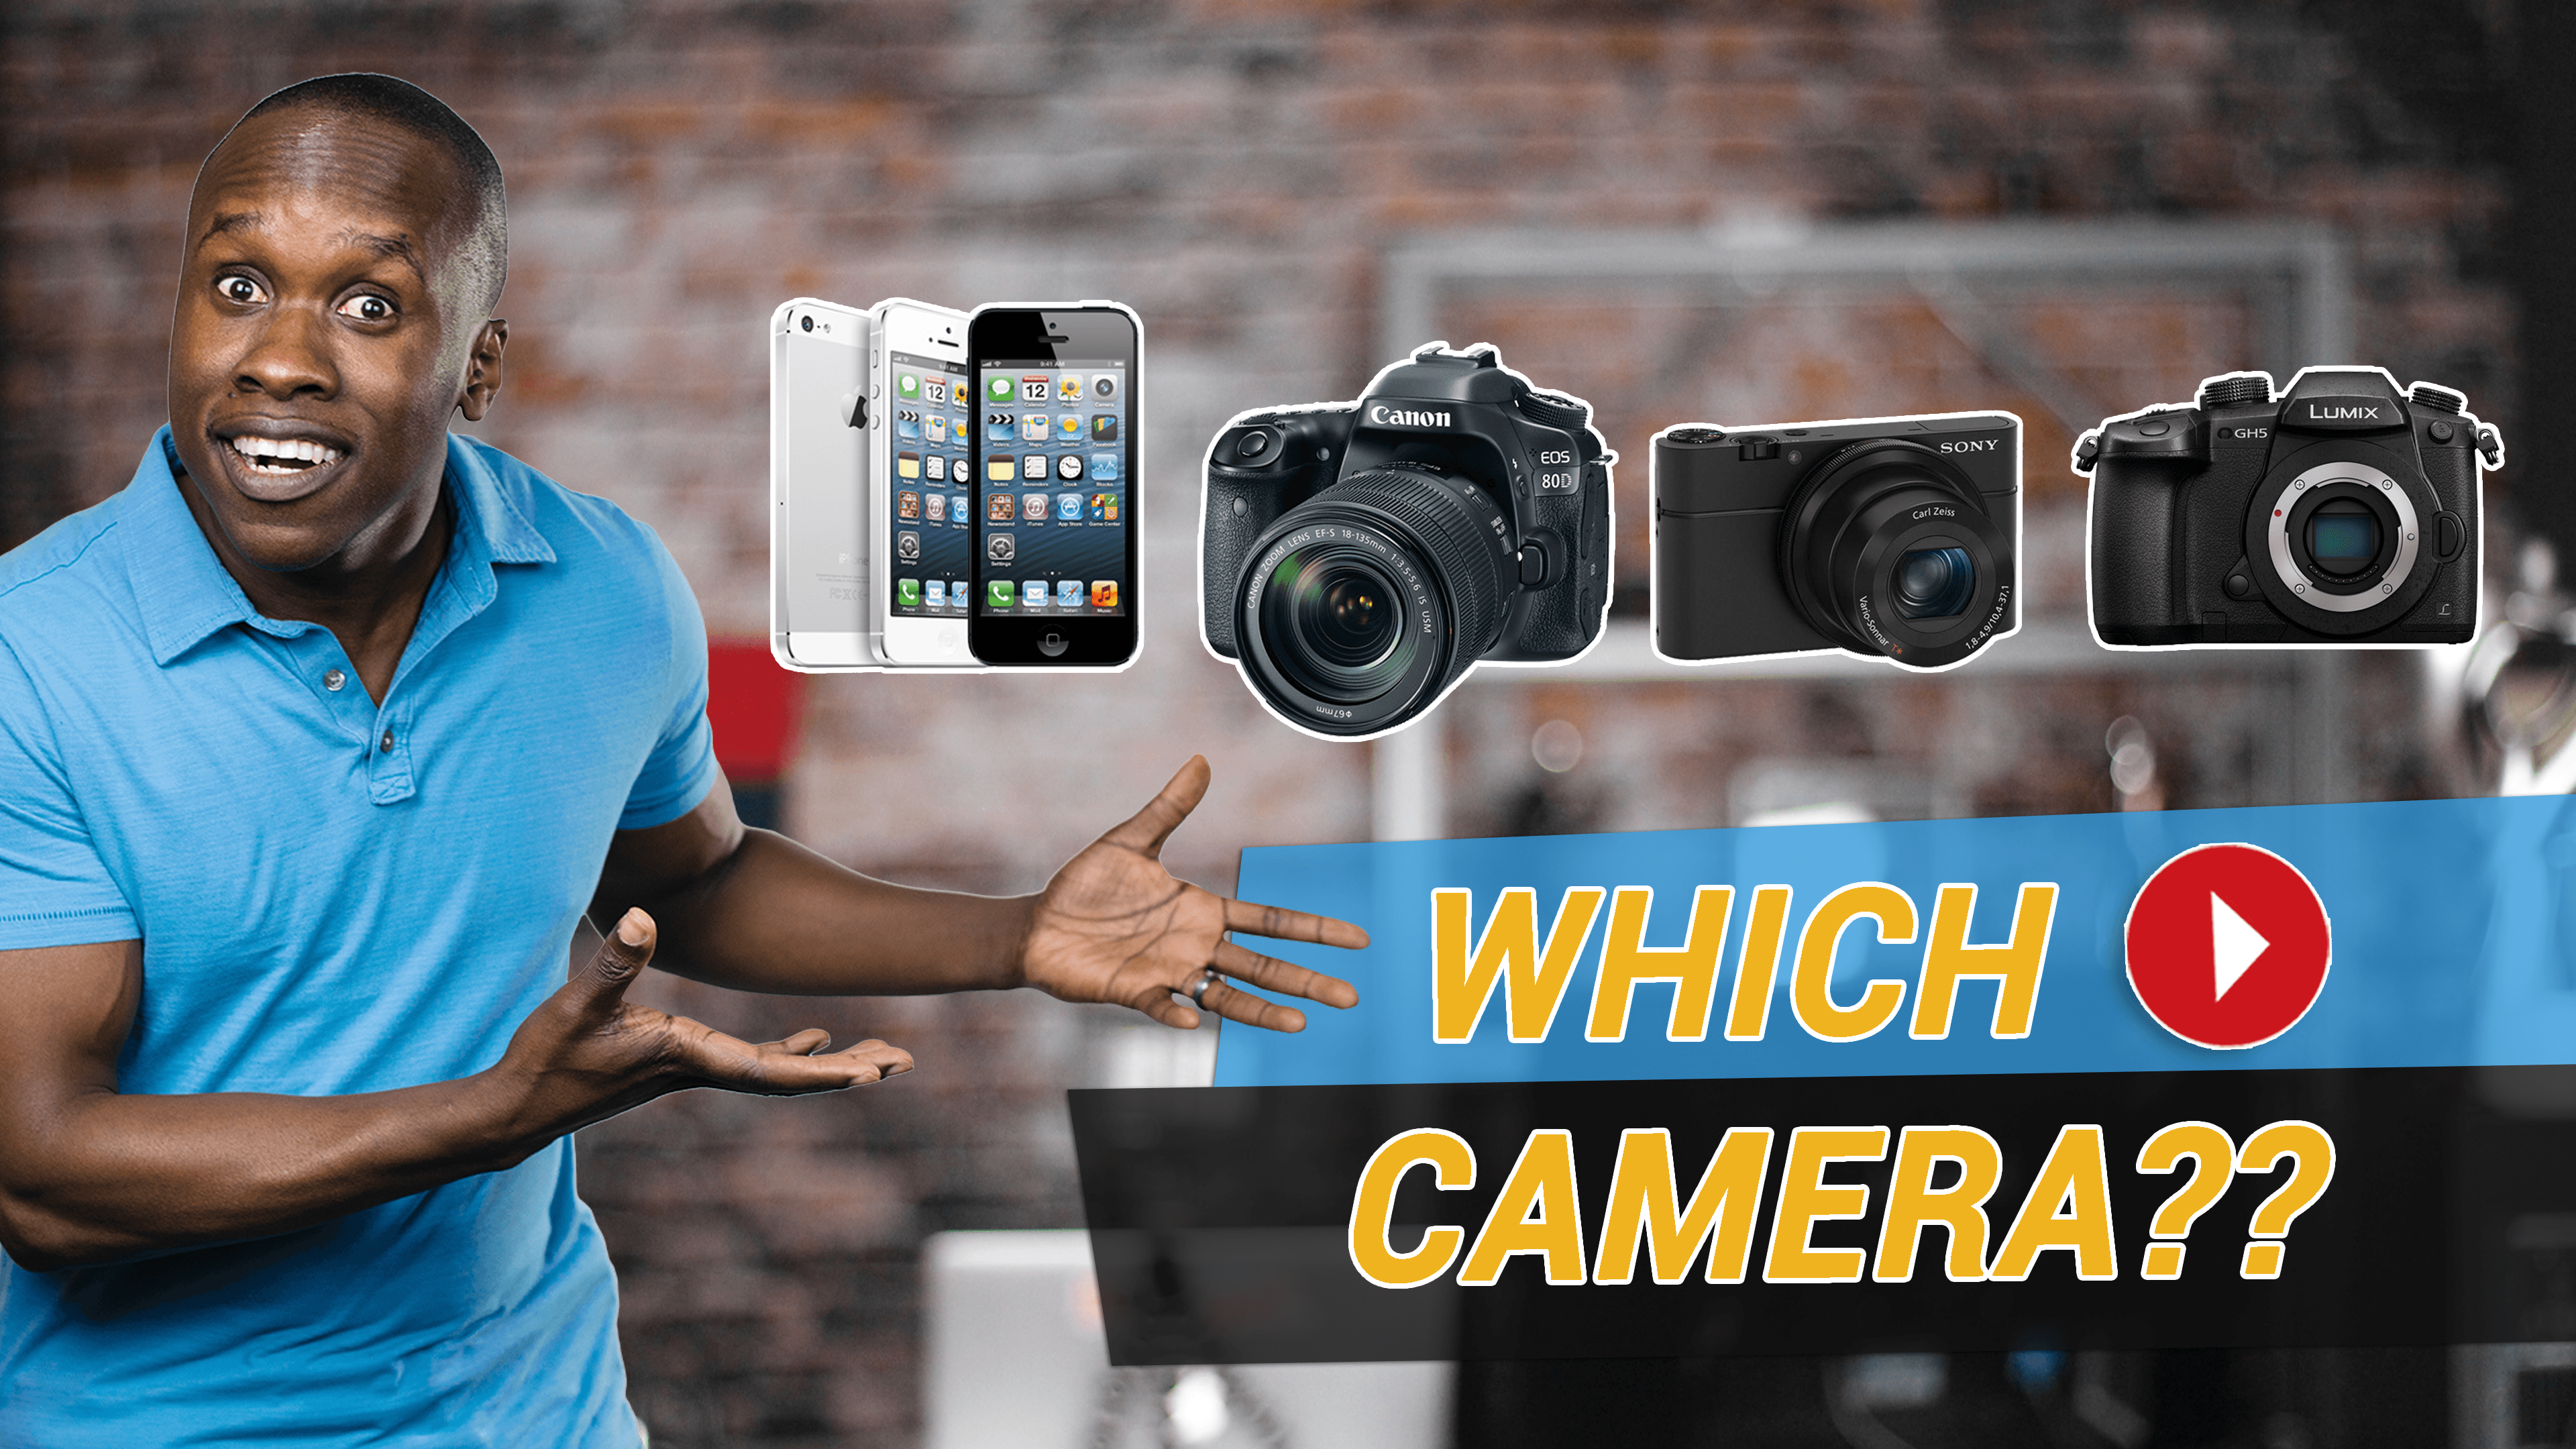 What Camera do you use?. E-katalog блоггер. Video for youtube. Youtube 4g